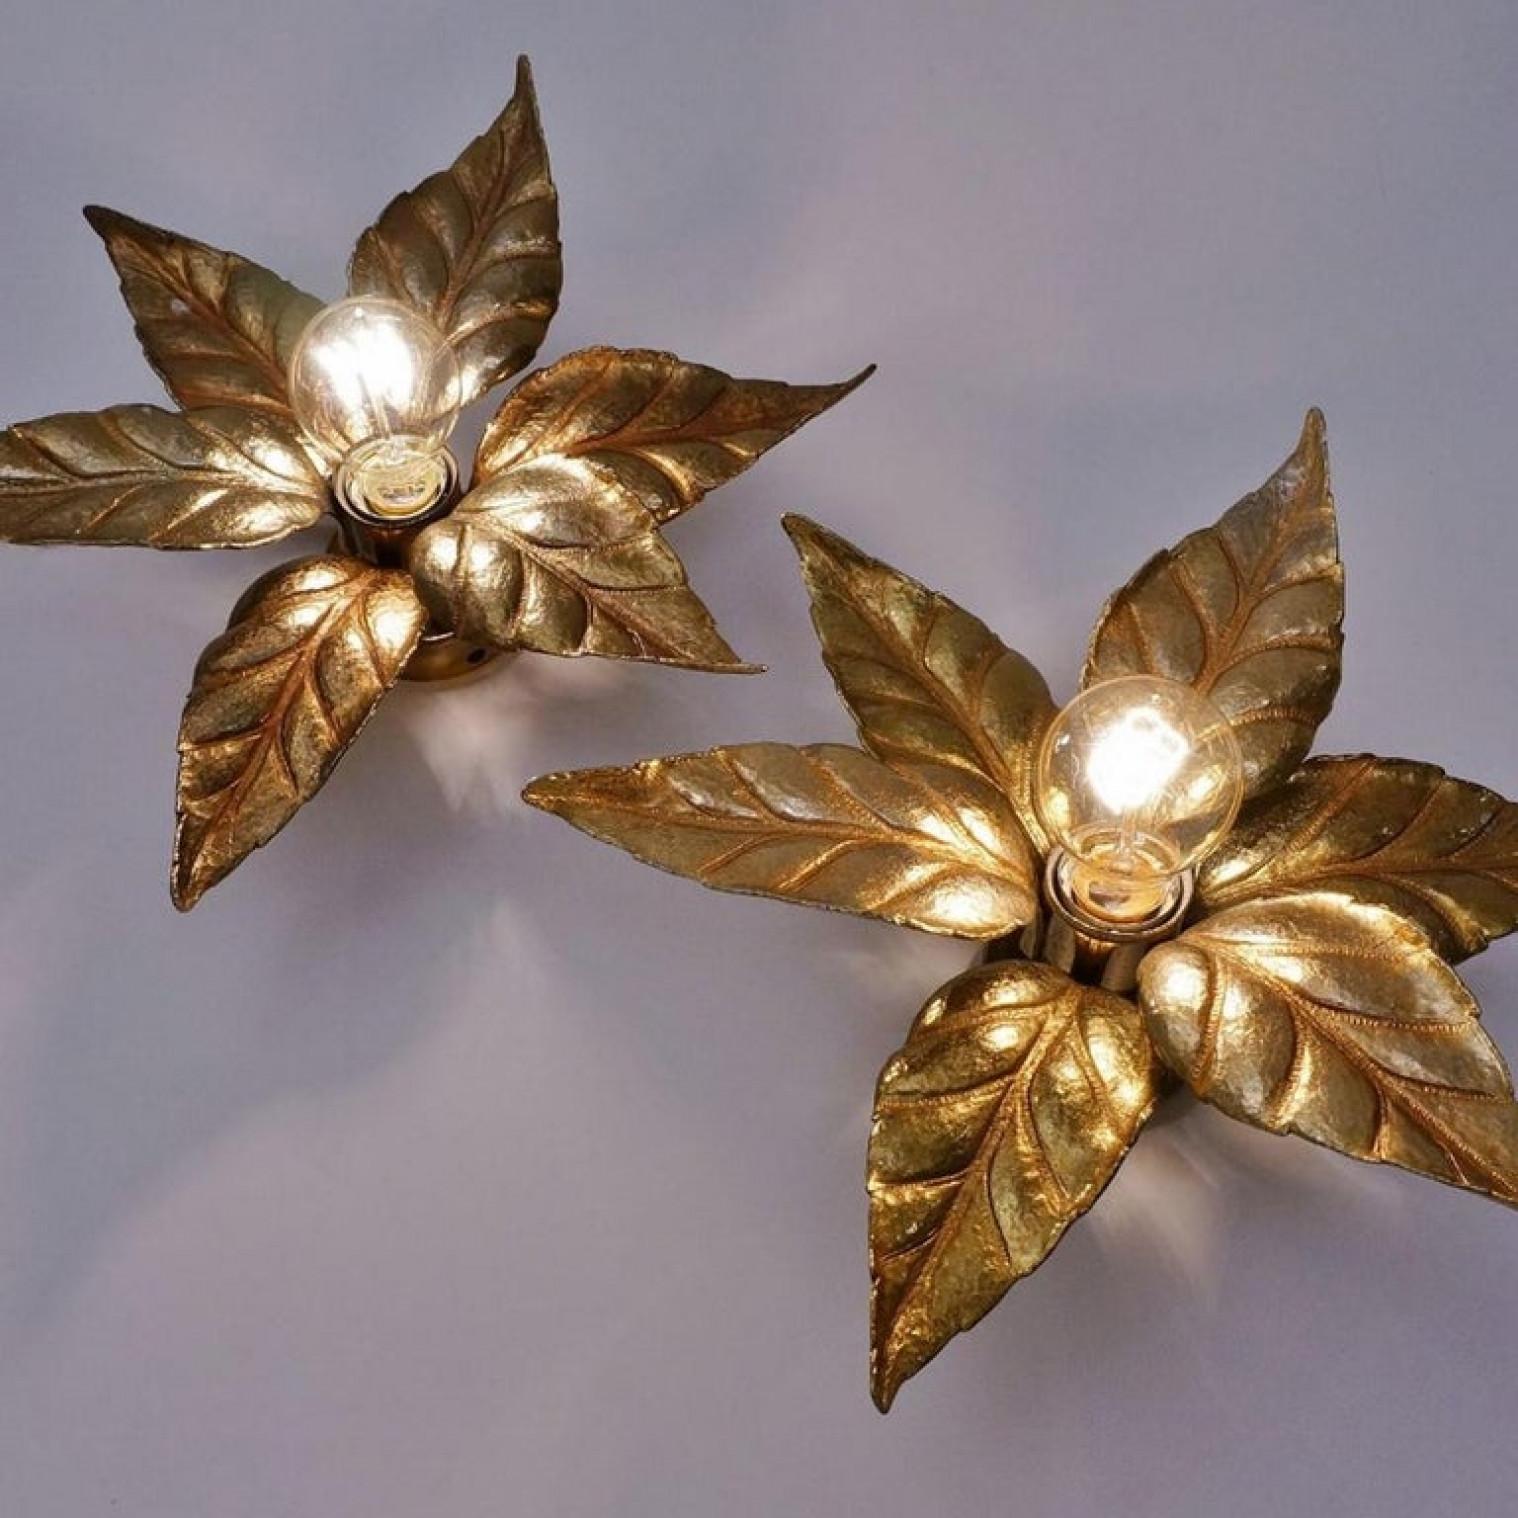 Two very nice massive flower wall lights, made in Belgium in the 1970s. In a style reminiscent of designs by Willy Daro. These lights are made of brass and look like a life-size big flower, very nice sculpted in brass.

The golden brass reflects in